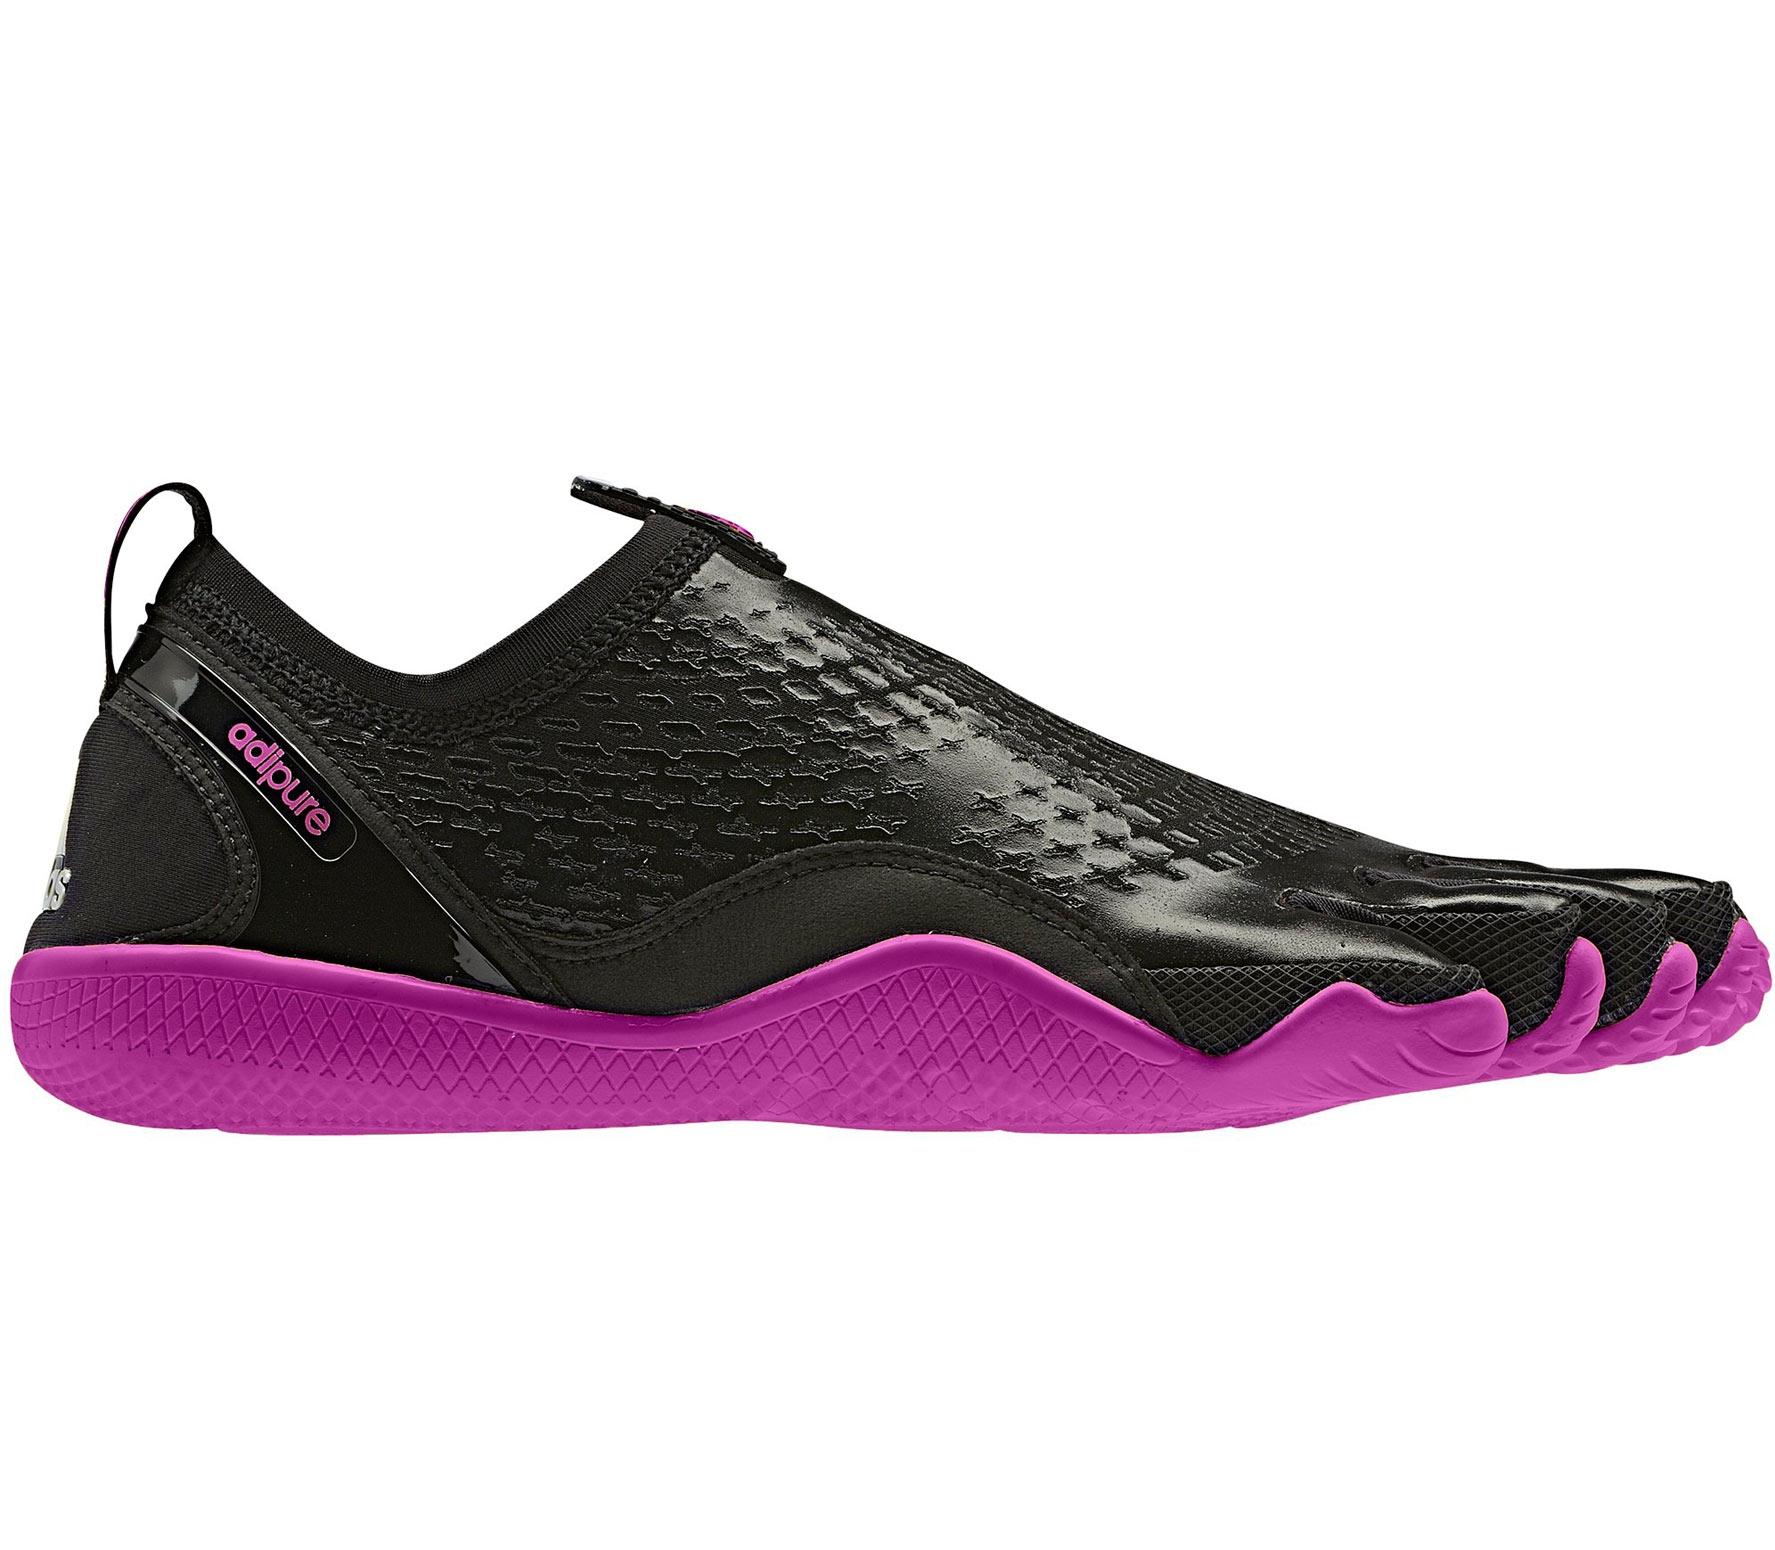 Foto Adidas - Zapatillas Fitness Mujer Adipure Trainer 1.1 - SS13